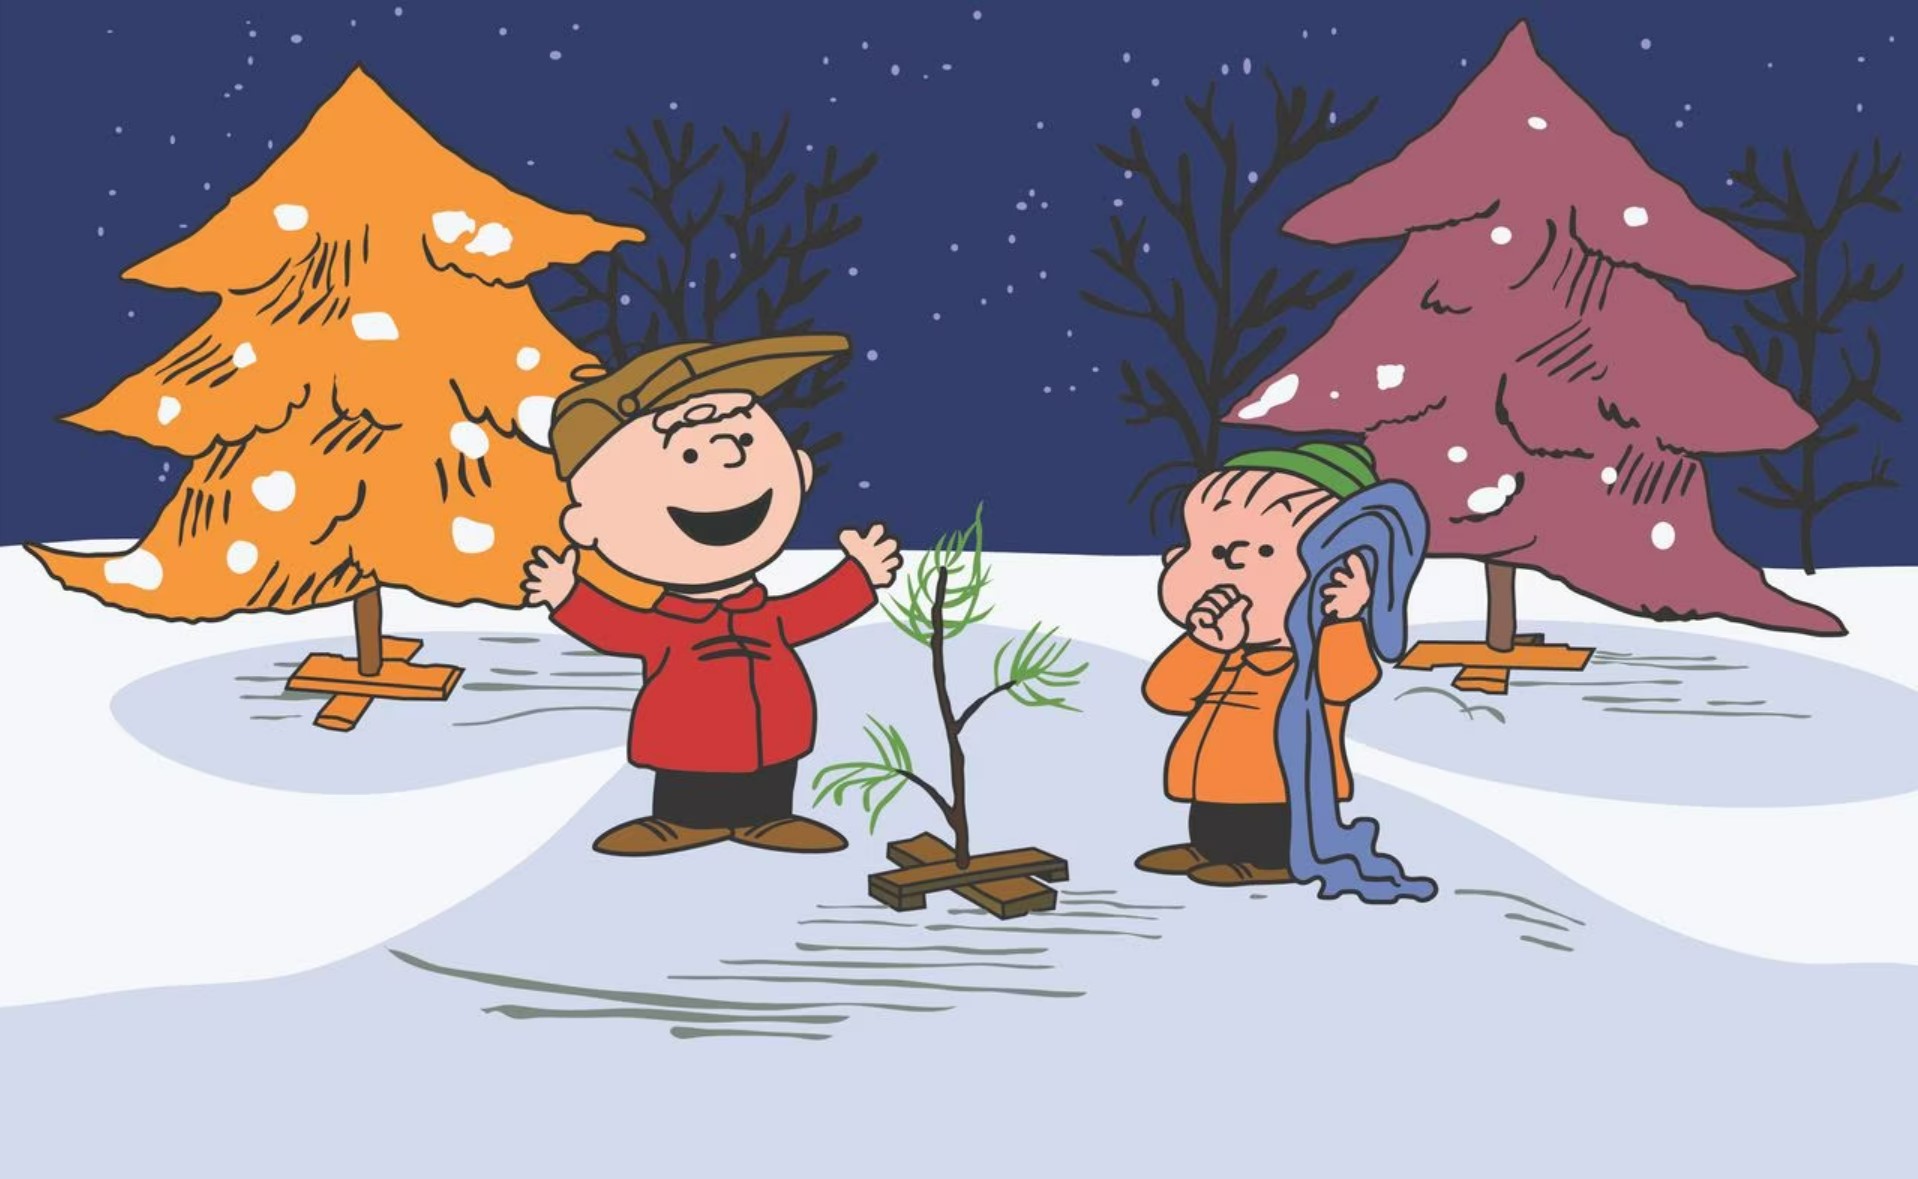 Image from Charlie Brown cartoon of Charlie Brown talking enthusiastically to Linus